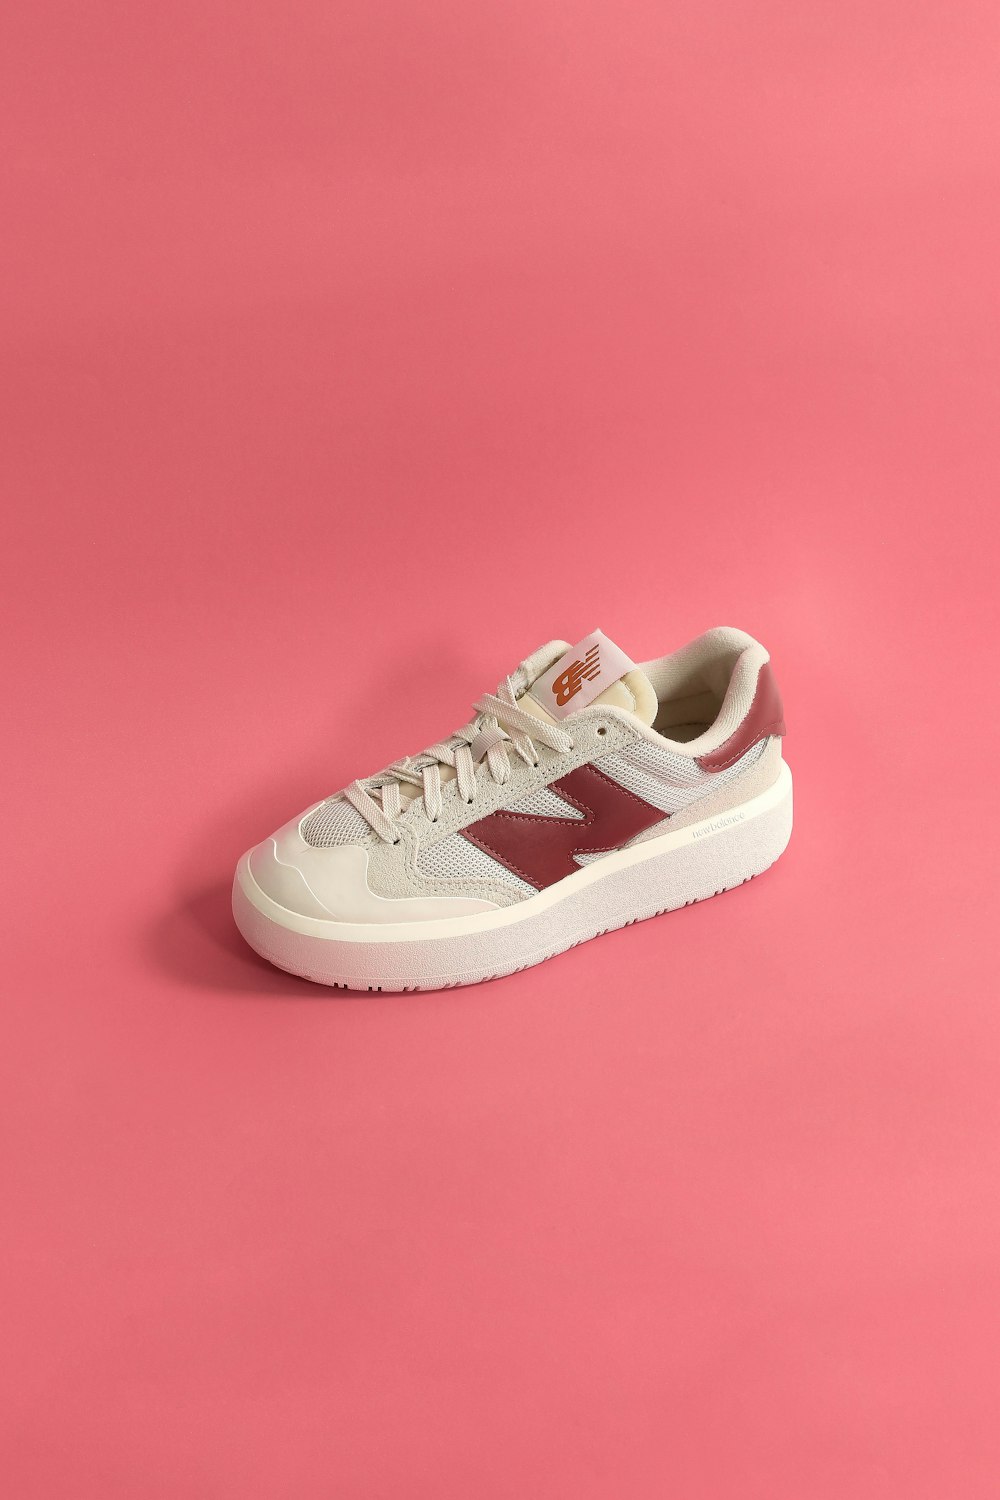 a white and red sneaker on a pink background